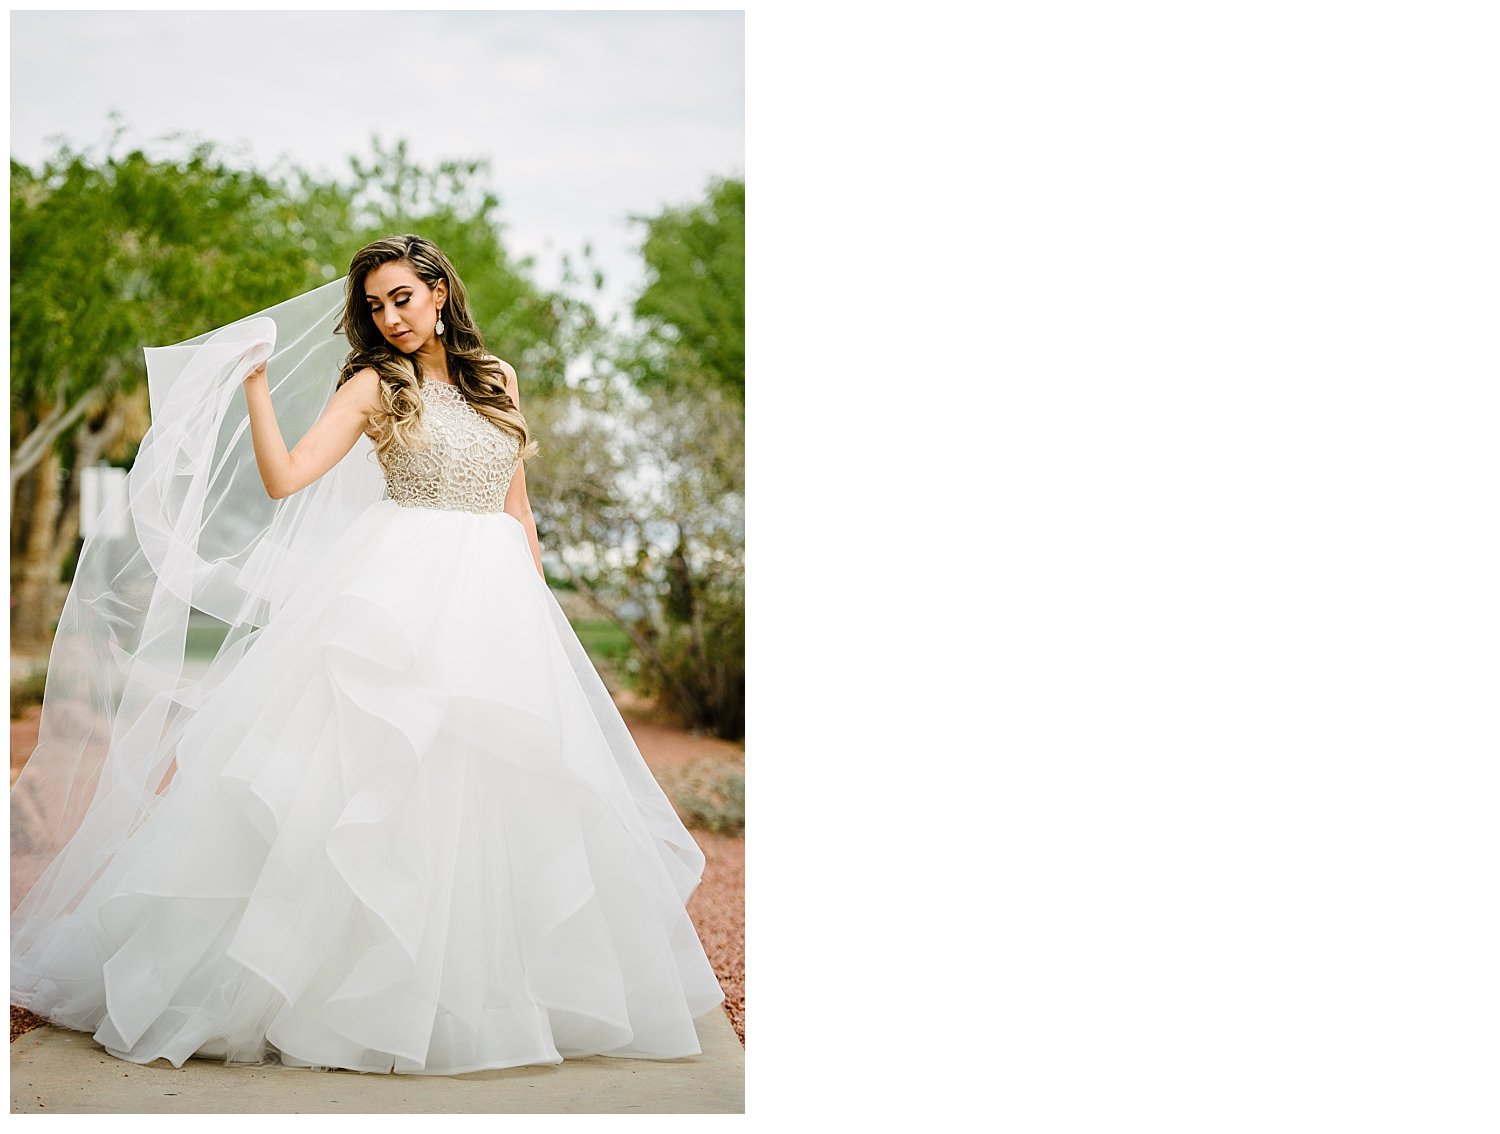 Wedding portraits in El Paso Texas by Stephane Lemaire photography